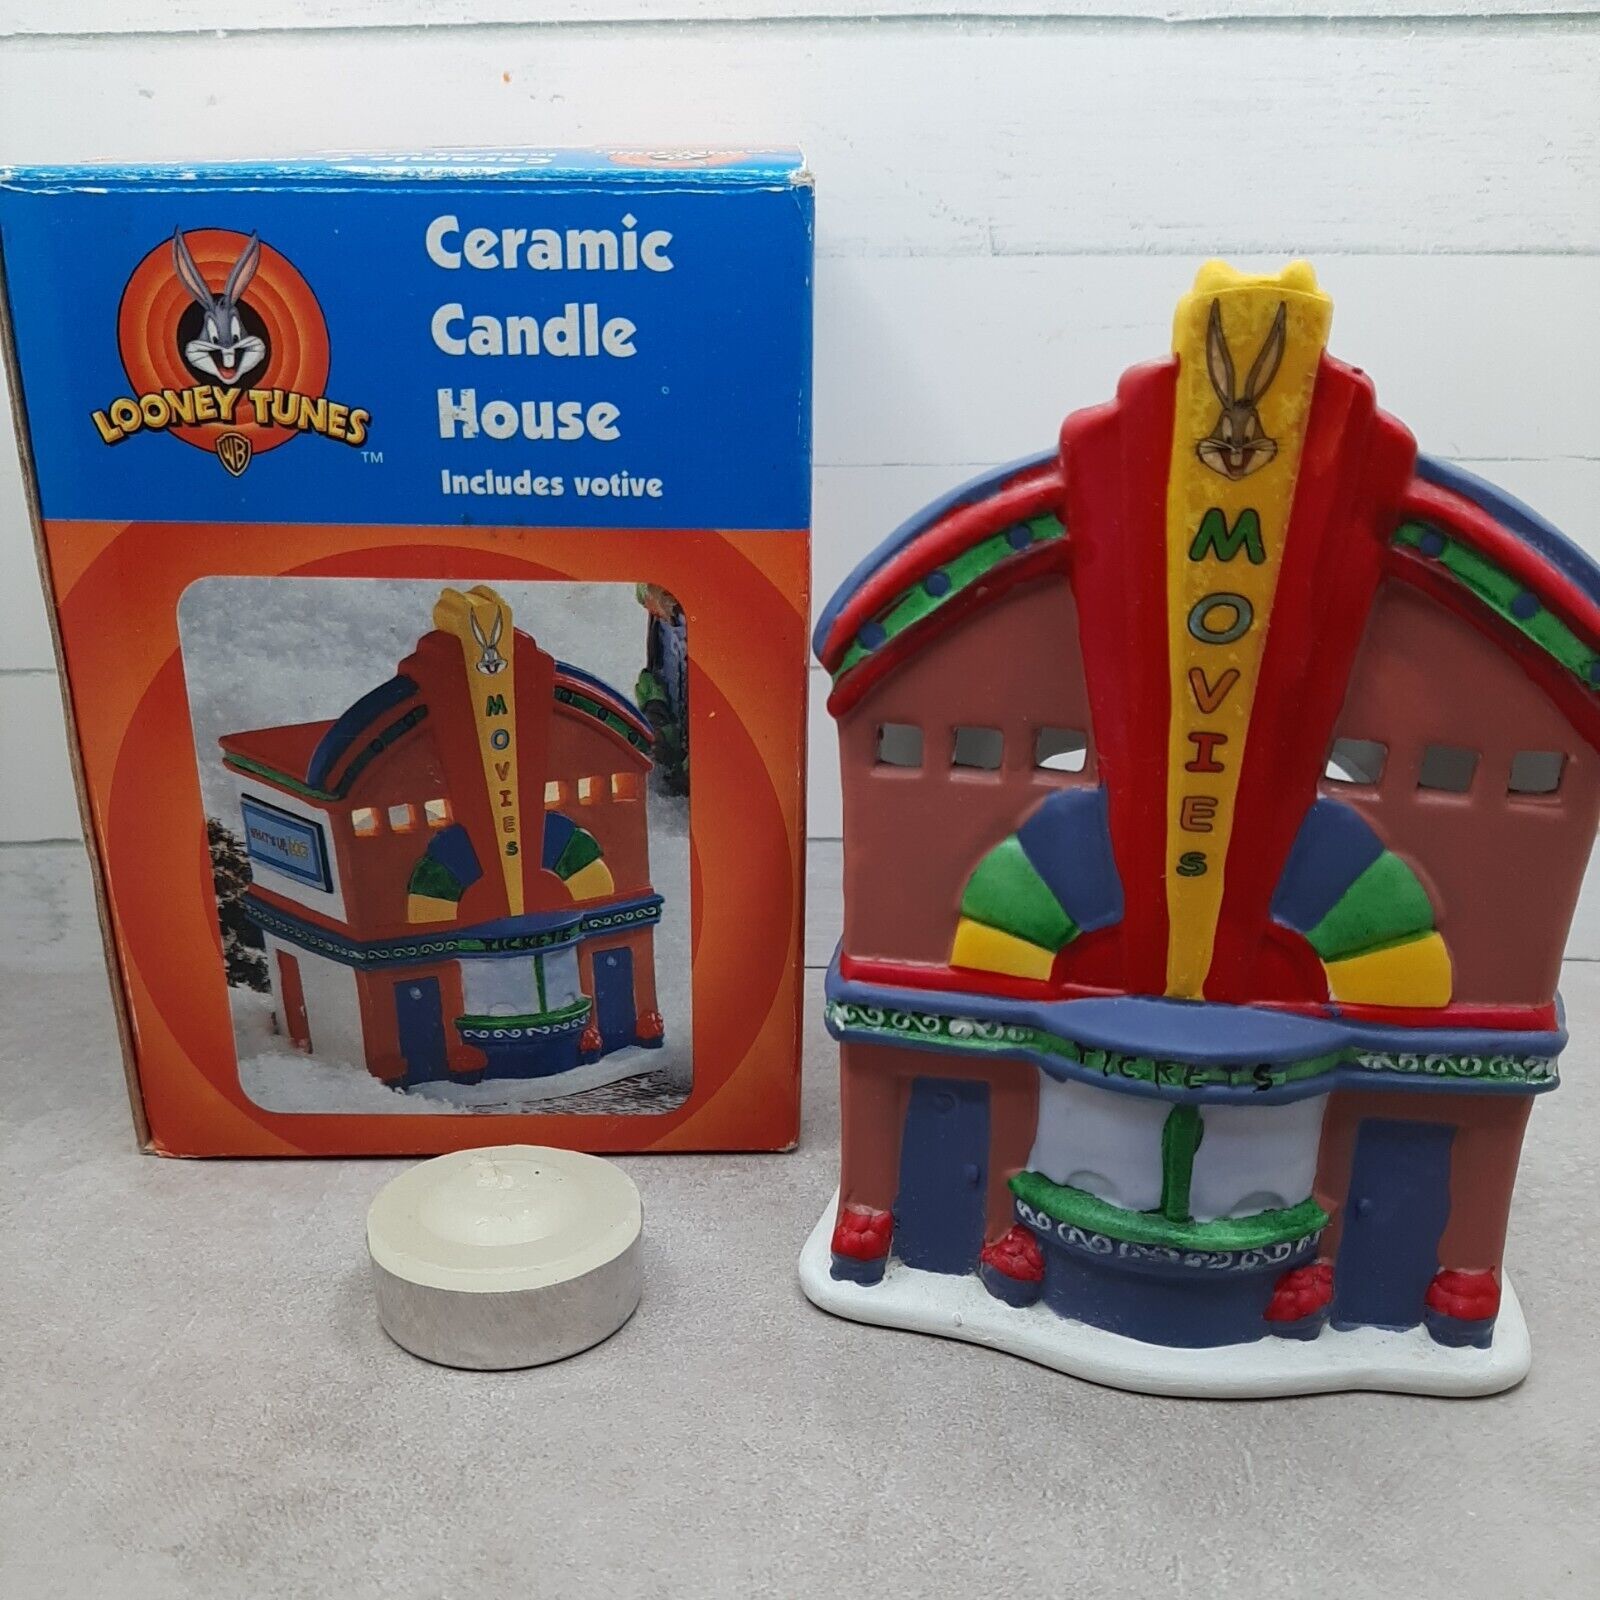 LOONEY TUNES Bugs Bunny ceramic candle house Bugs Bunny movie theater 1980s box - $12.55